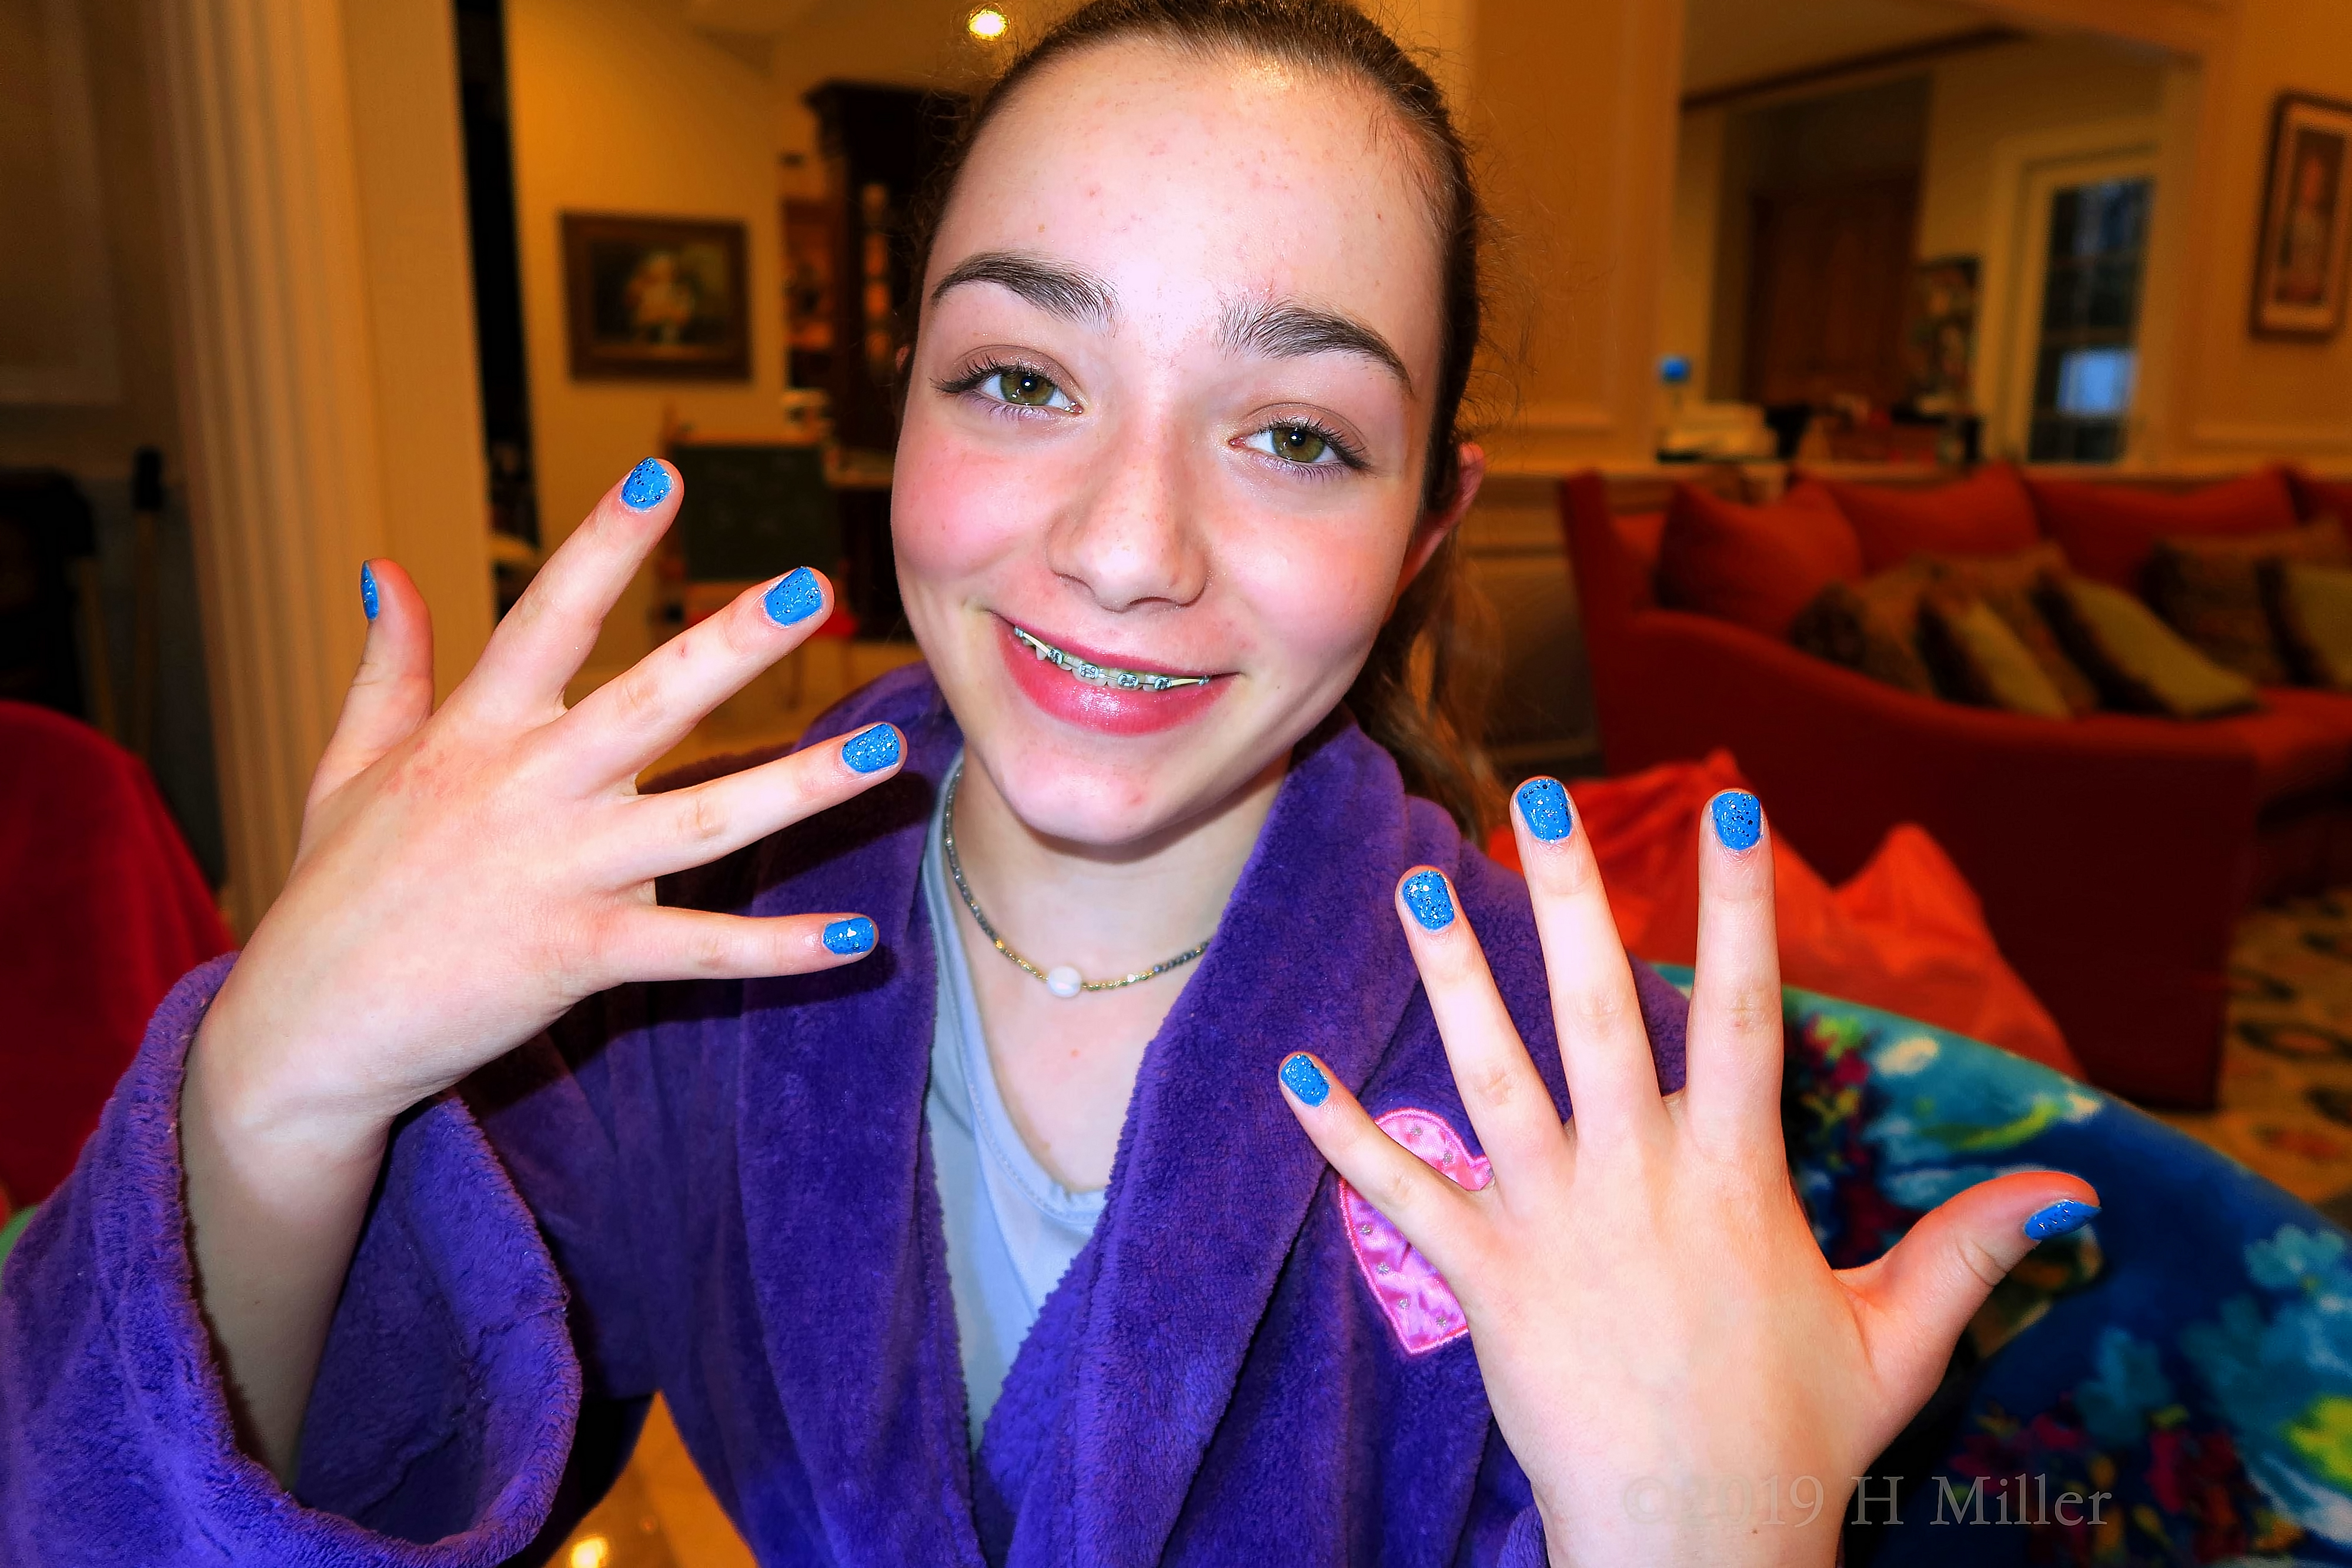 She Loves It! Her Pretty Kids Manicure Is Just What She Wanted!